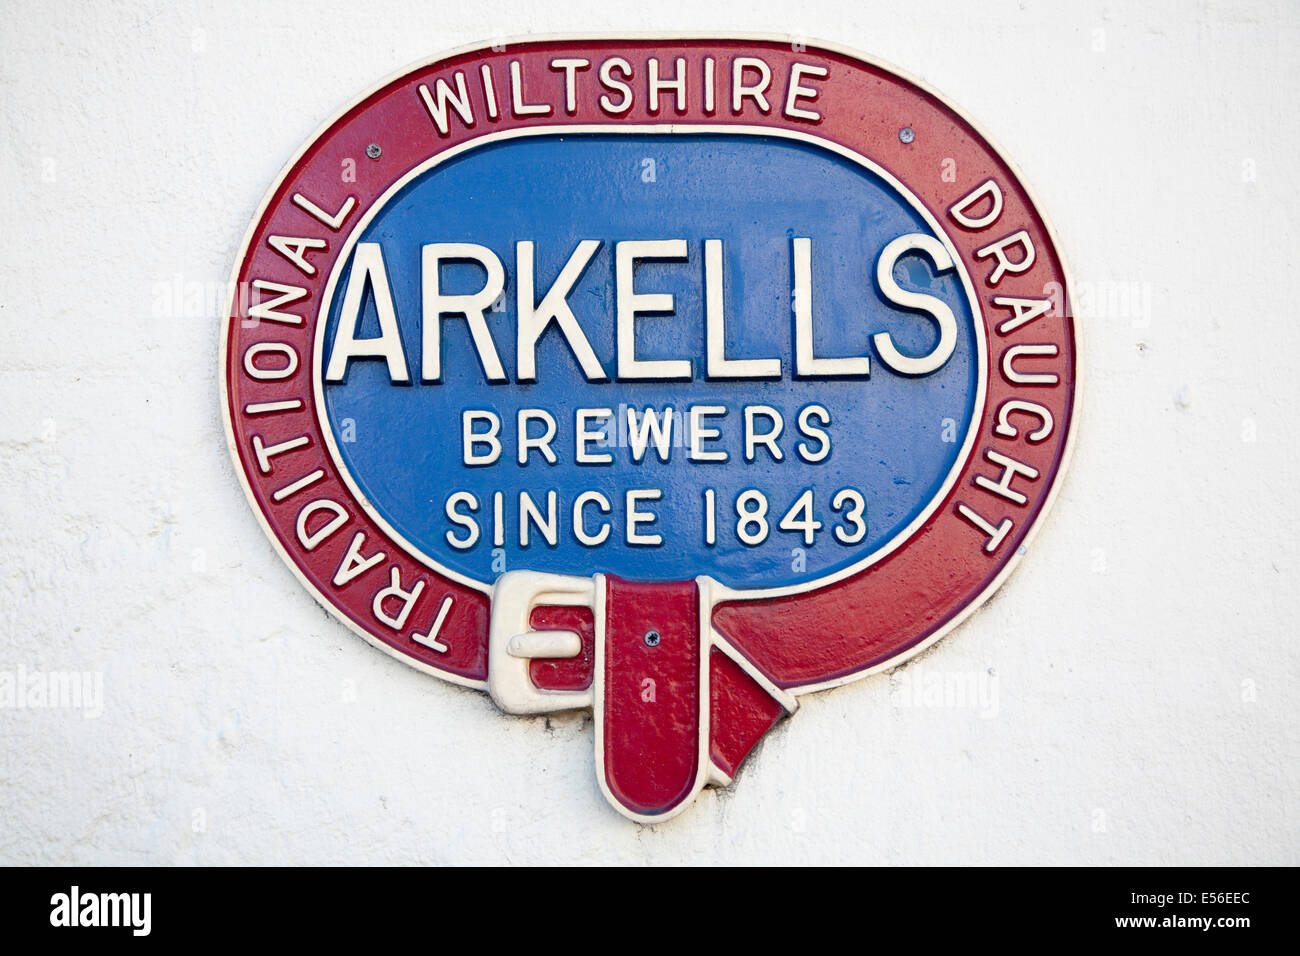 Close up of old metal advertising sign for Arkells brewers of traditional draught beer since 1843, Wiltshire, England Stock Photo